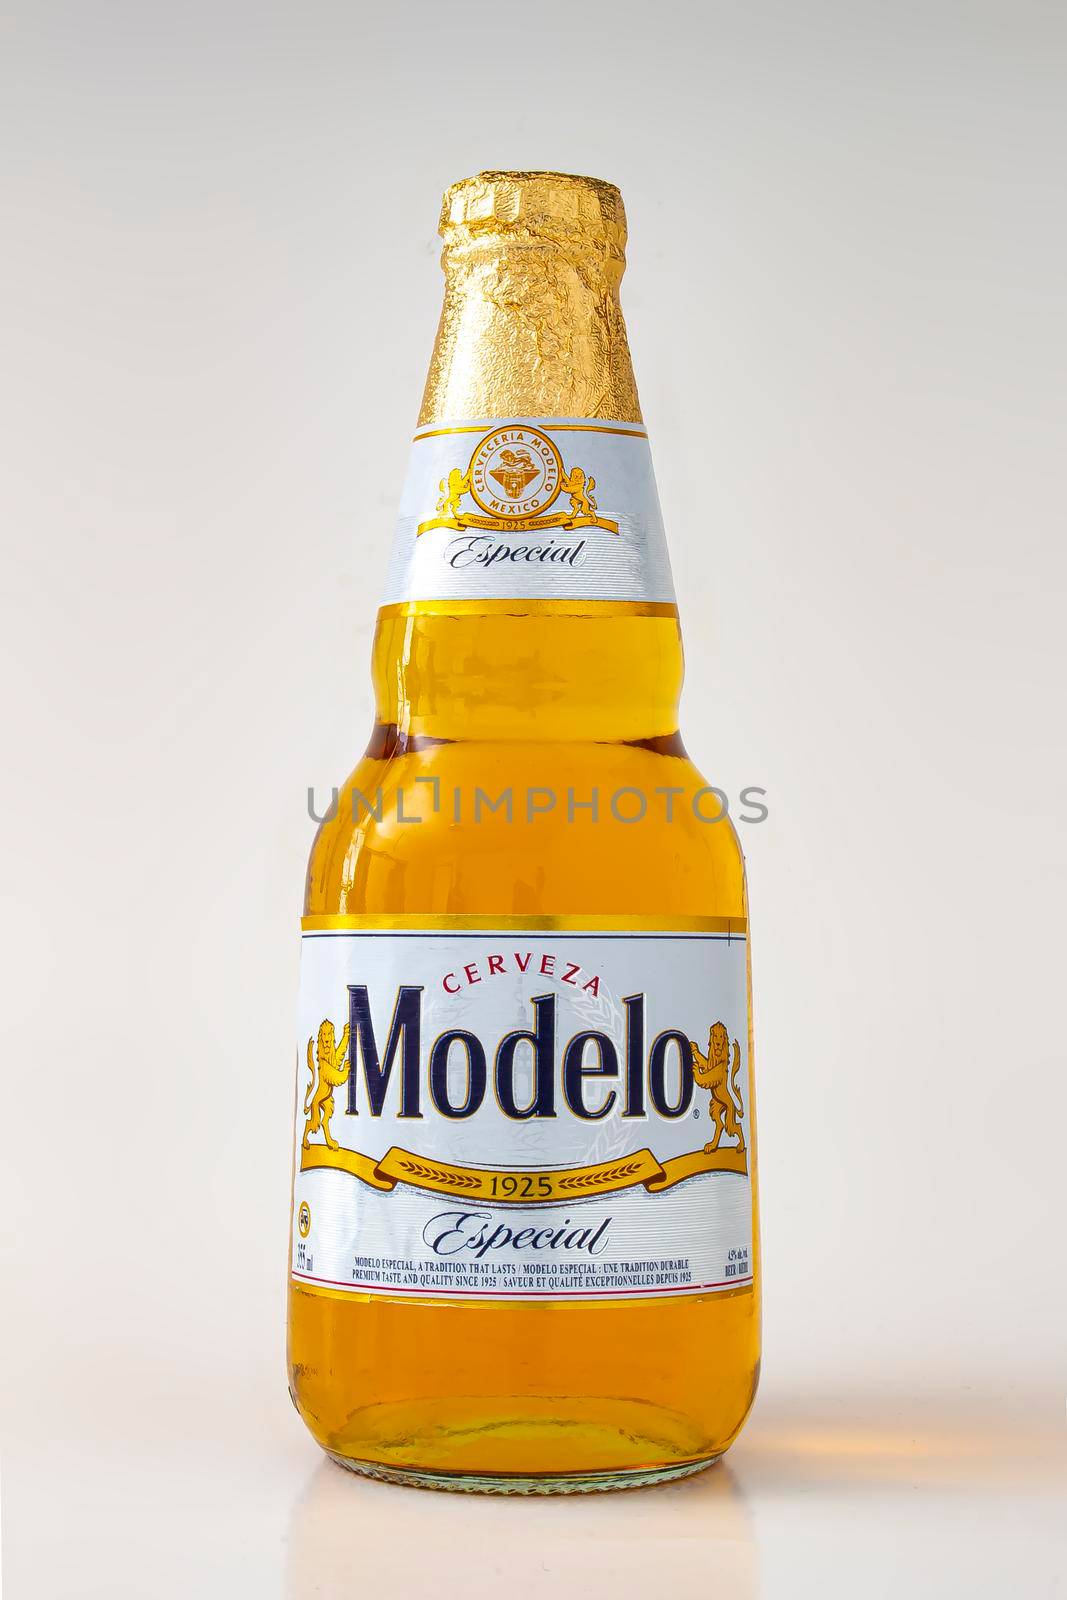 Modelo Especial beer bottle clear bright yellow colour on a white background by oasisamuel